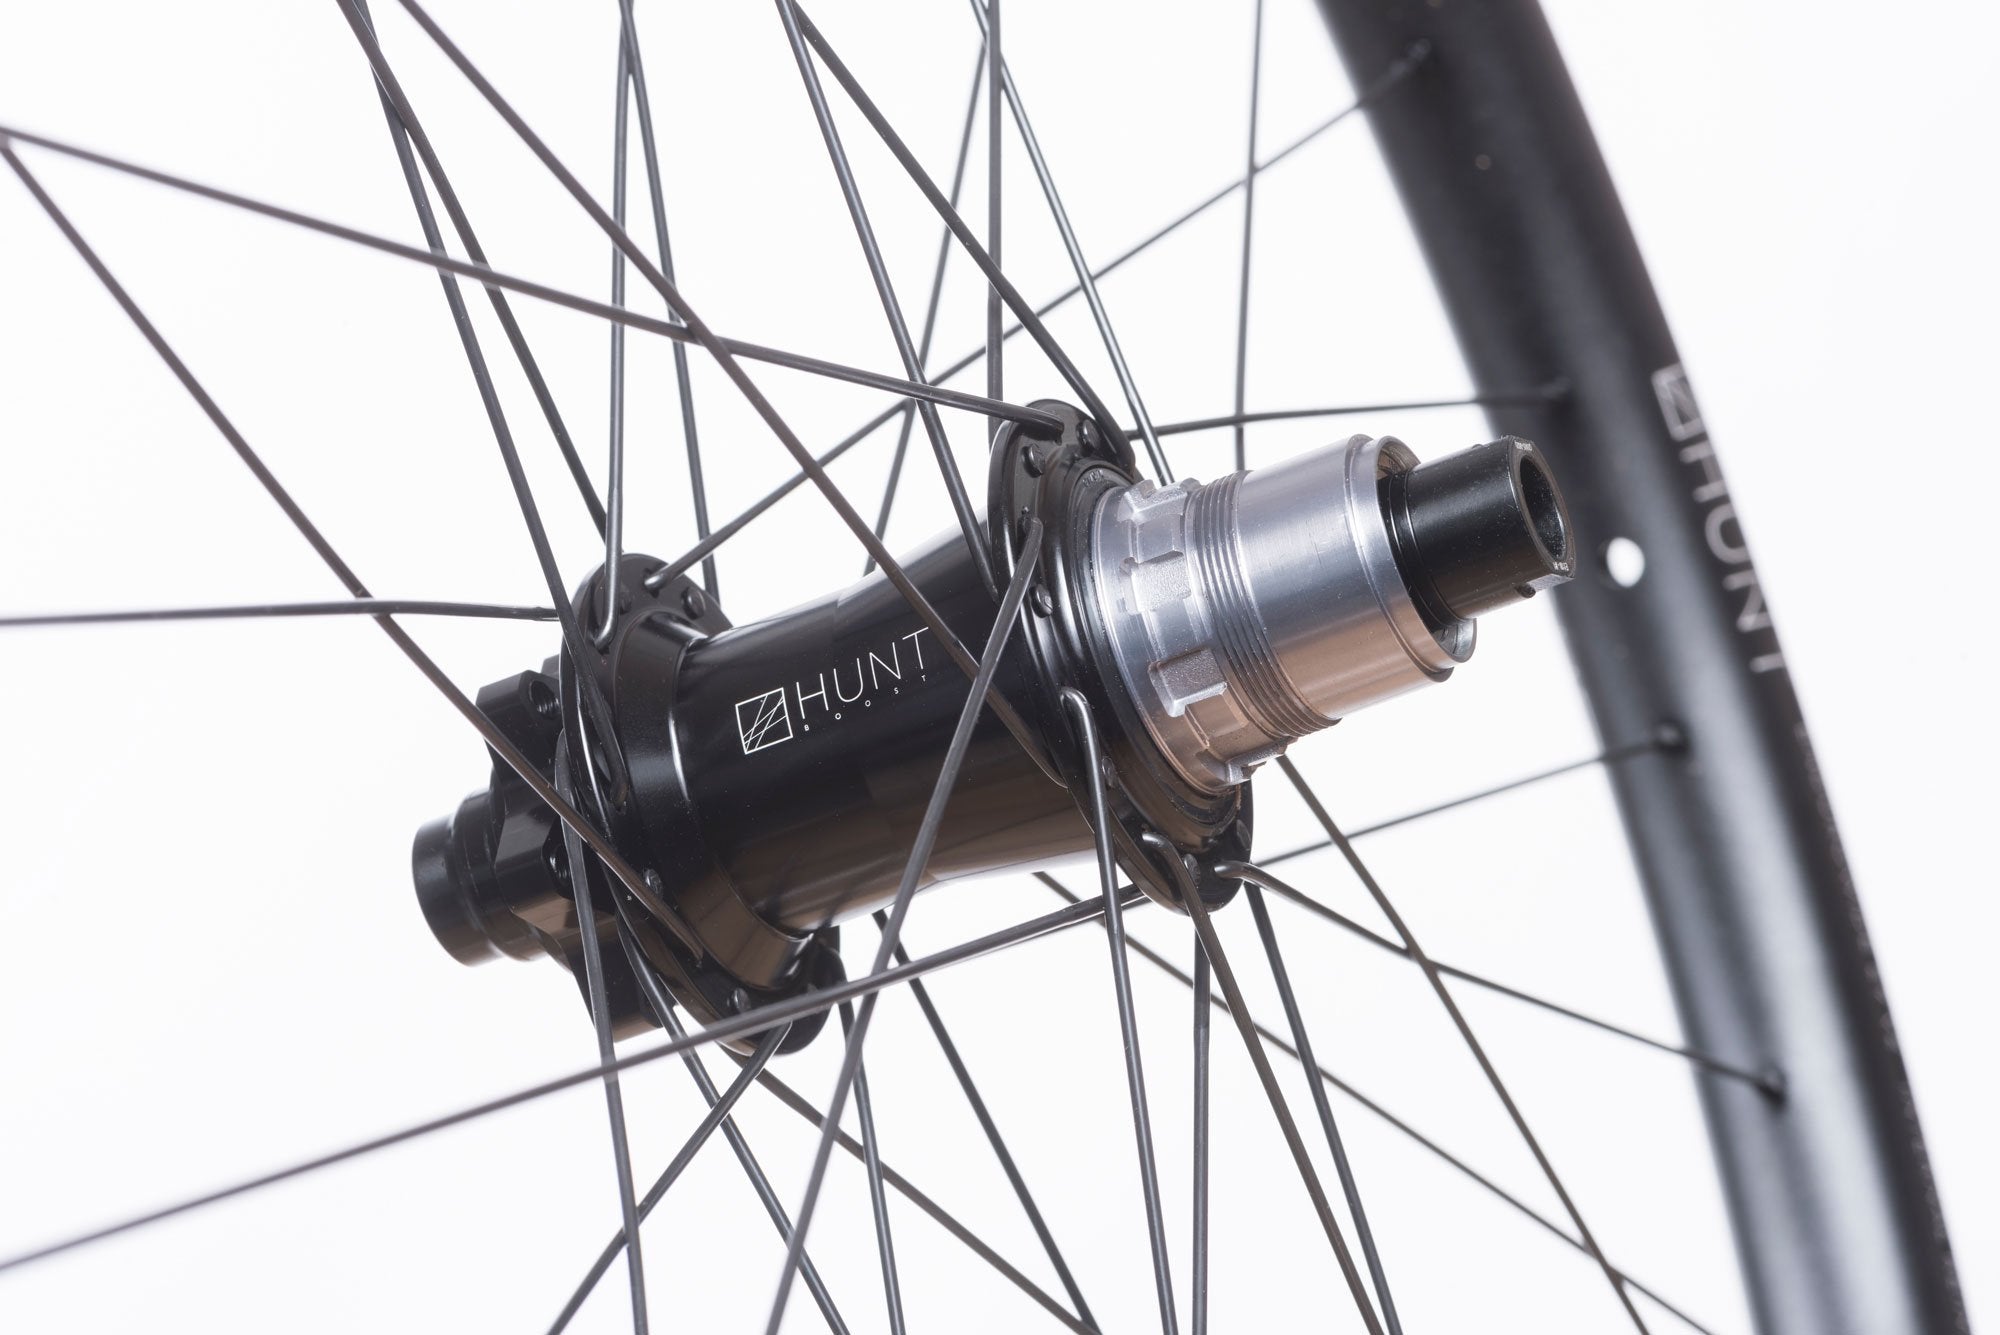 <h1>Rear Hub</h1><i>The demands of modern day Enduro riding are tougher than ever before, so the EnduroWide hubs have been designed with oversized 17mm axles to increase stiffness and bearing durability. On the rear, the Hunt RapidEngage MTB hubs with a fast 5 degree engagement, means you will be able to put the power down straight out of the corners. </i>